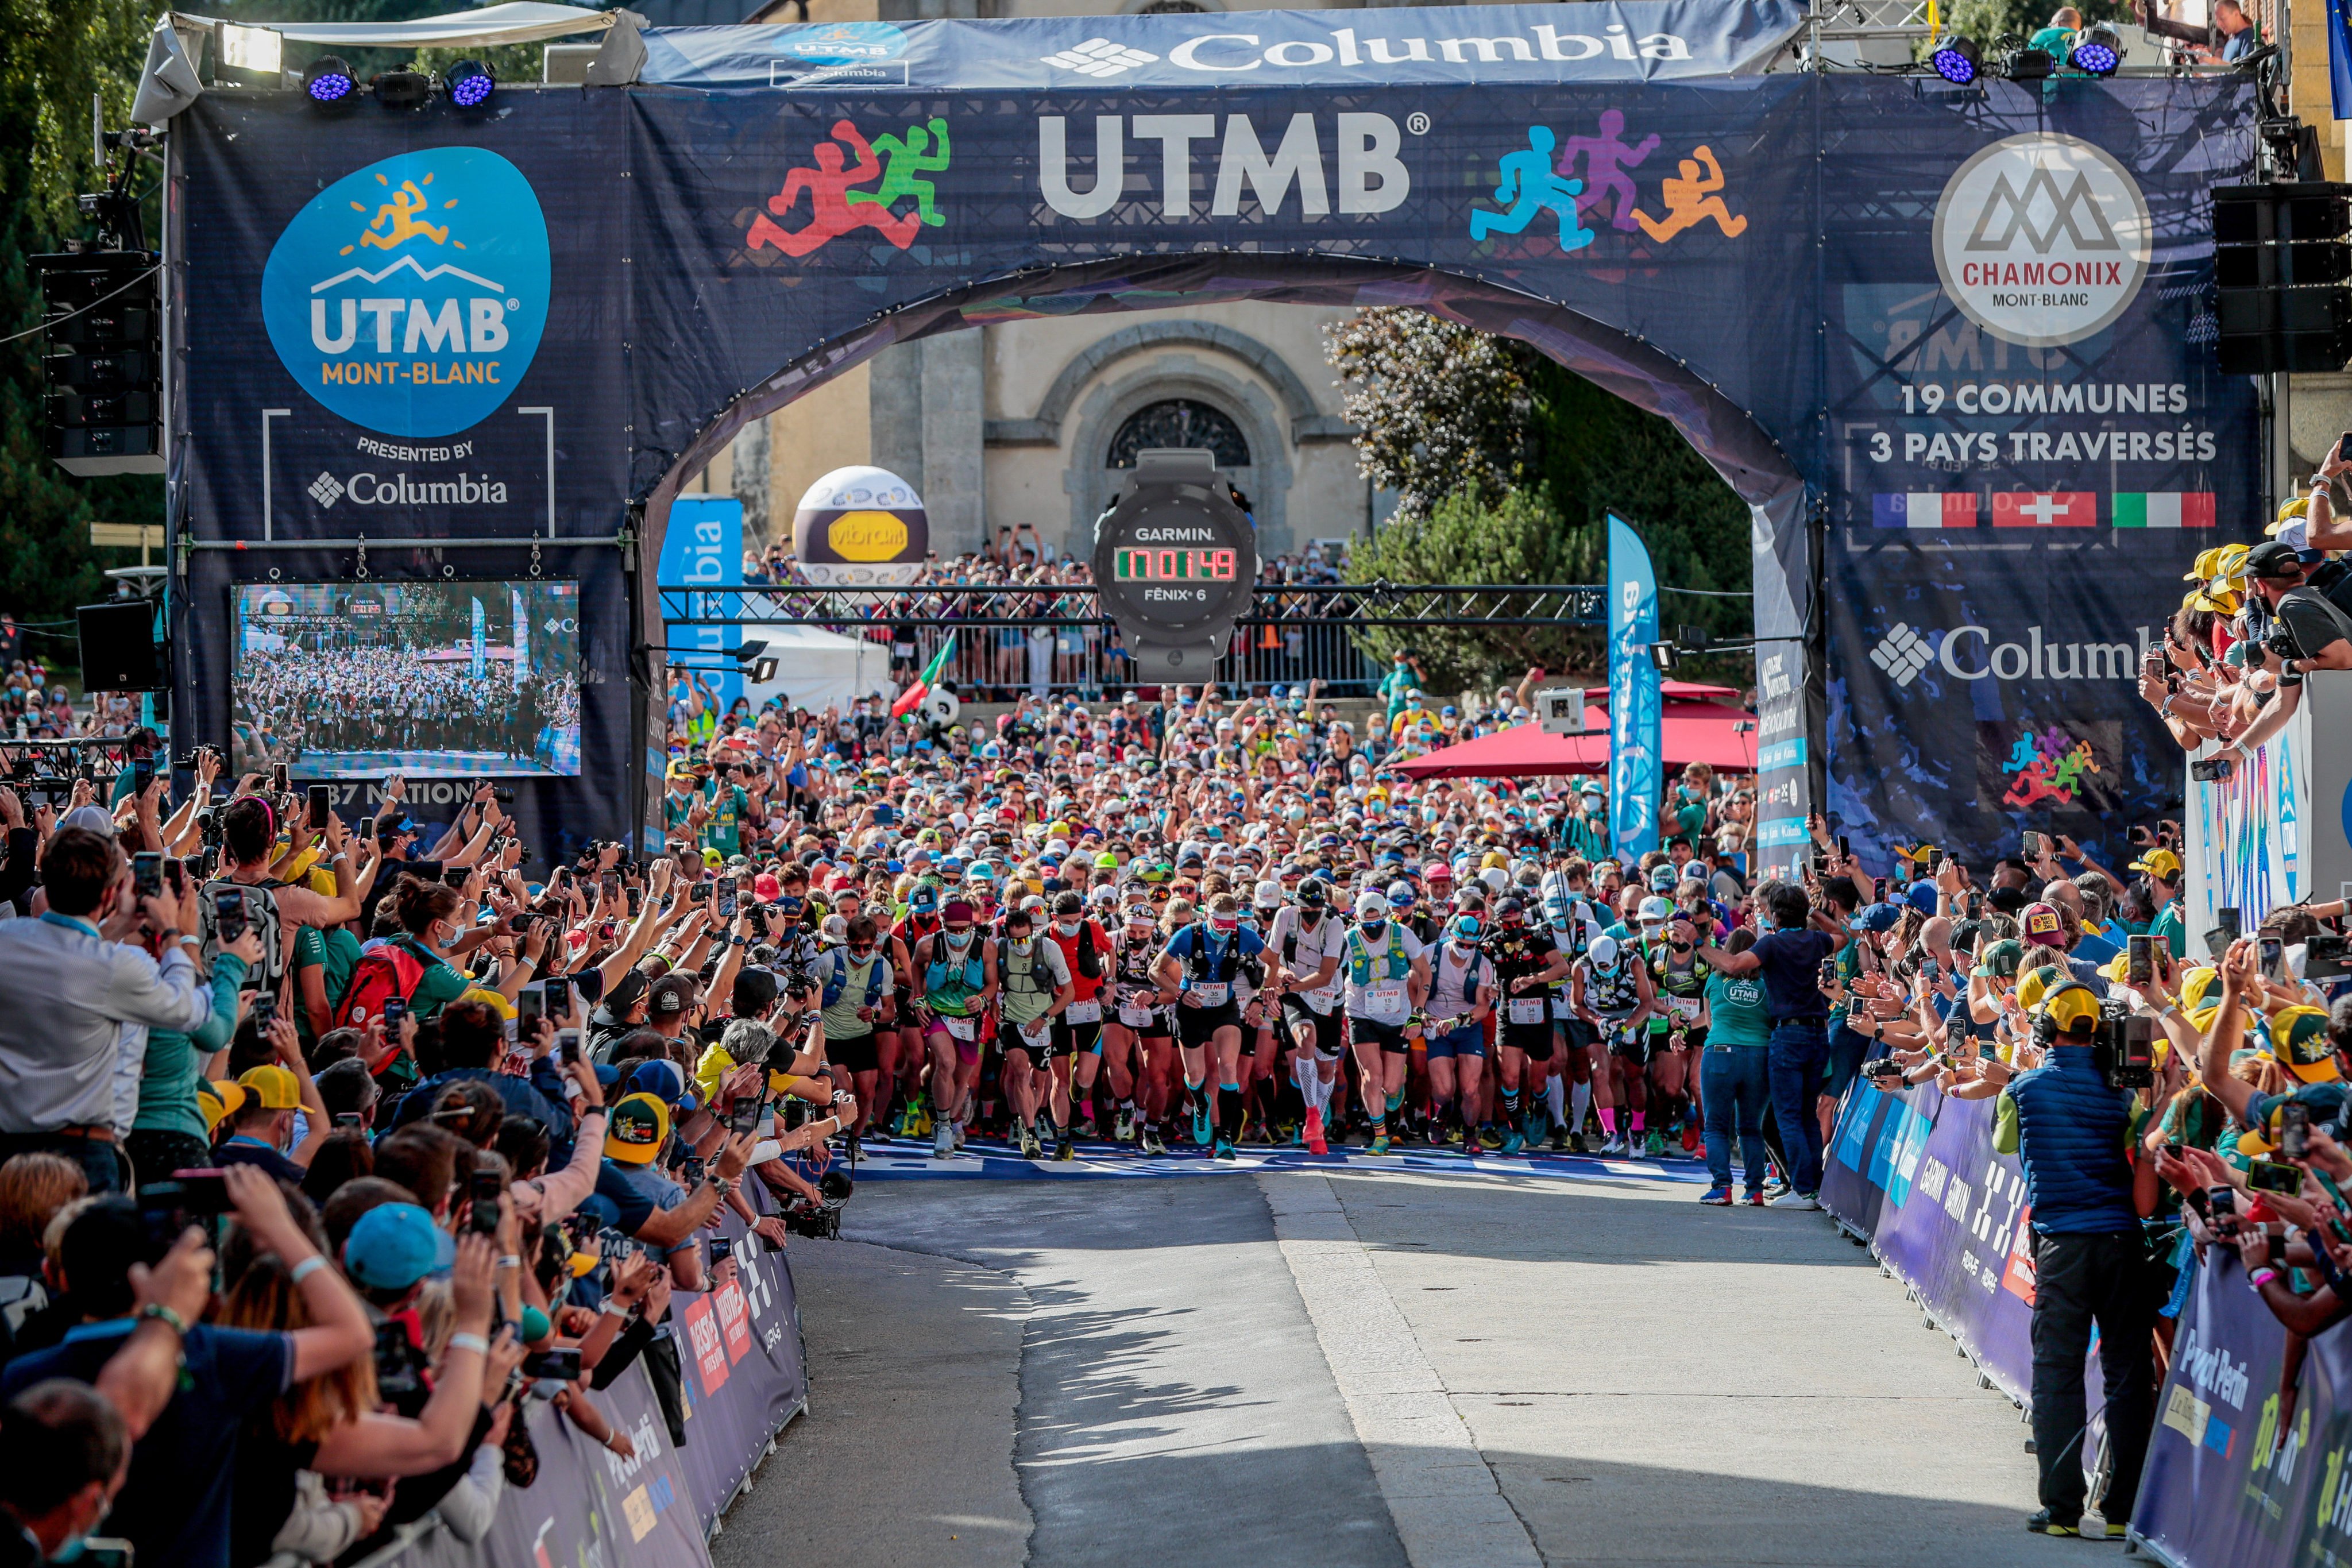 The UTMB is the most high-profile race in ultra running, and has attracted controversy for its seemingly commercial focus. Photo: Laurent Salino/UTMB